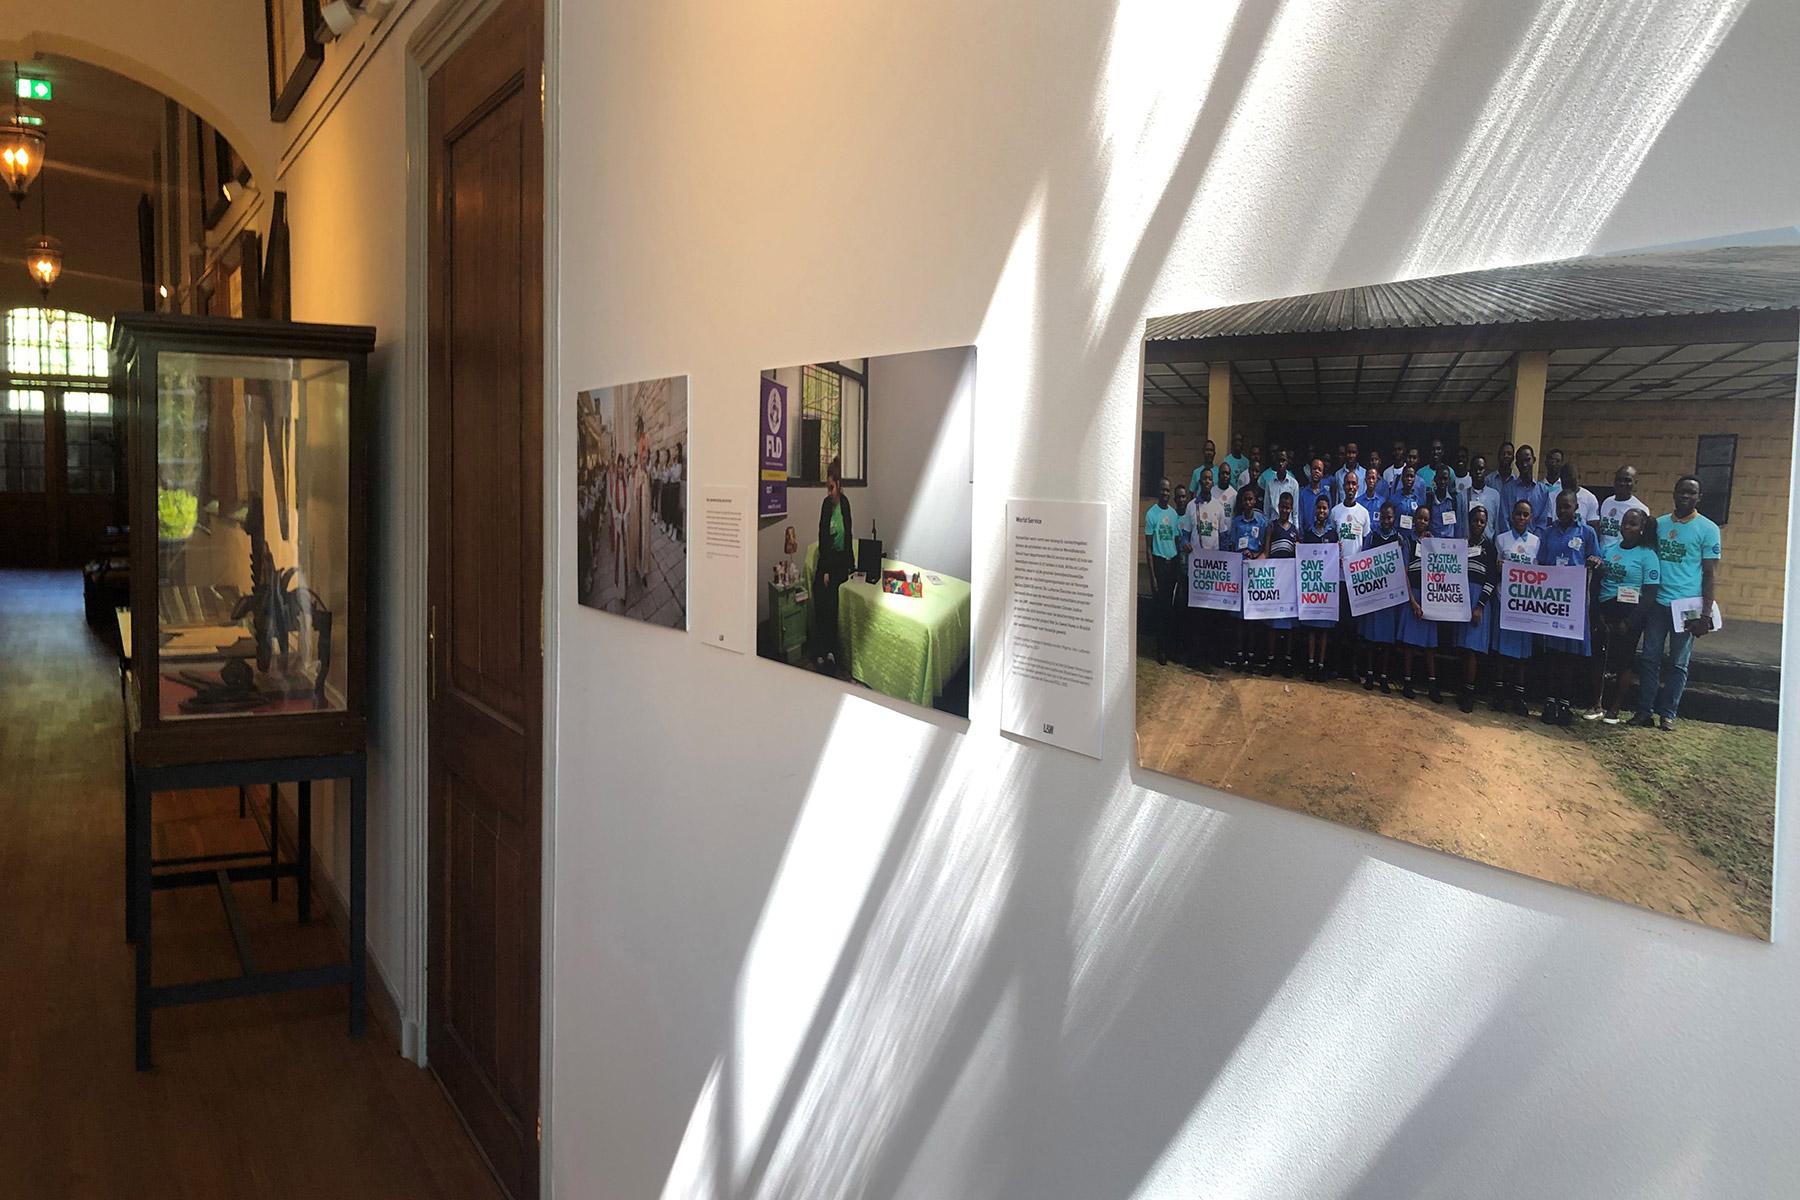 Current LWF projects supported by the Protestant Church in the Netherlands are featured in the exhibition. Photo: Luther Museum Amsterdam